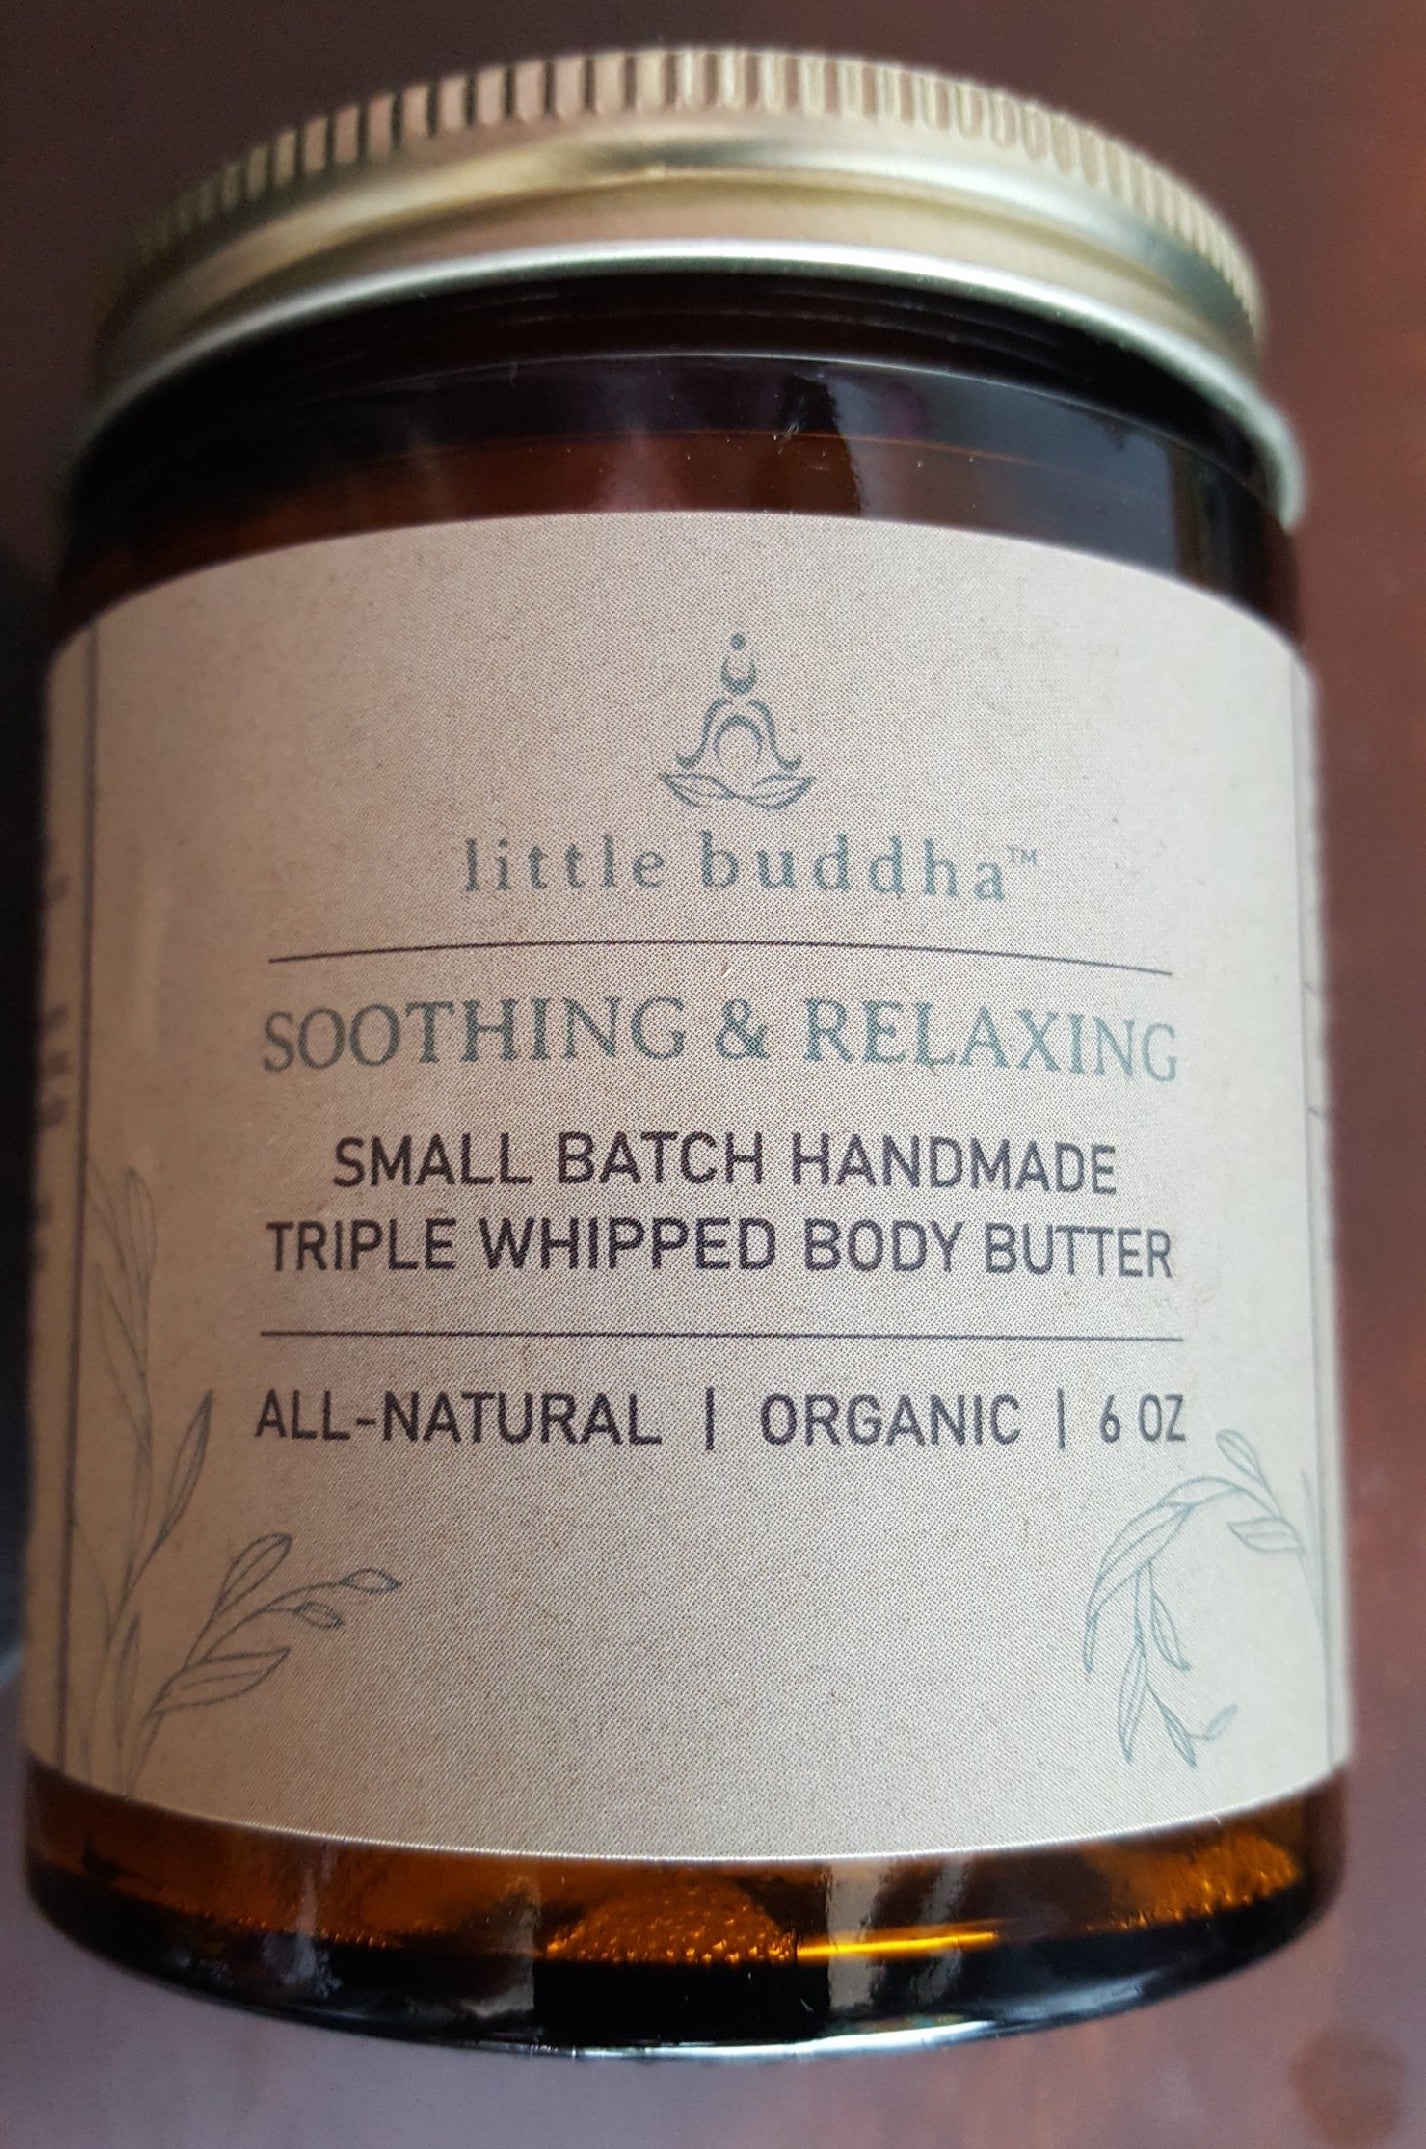 Cosmetic: Organic Hand and Body Butter - Soothing and Relaxing Lavender